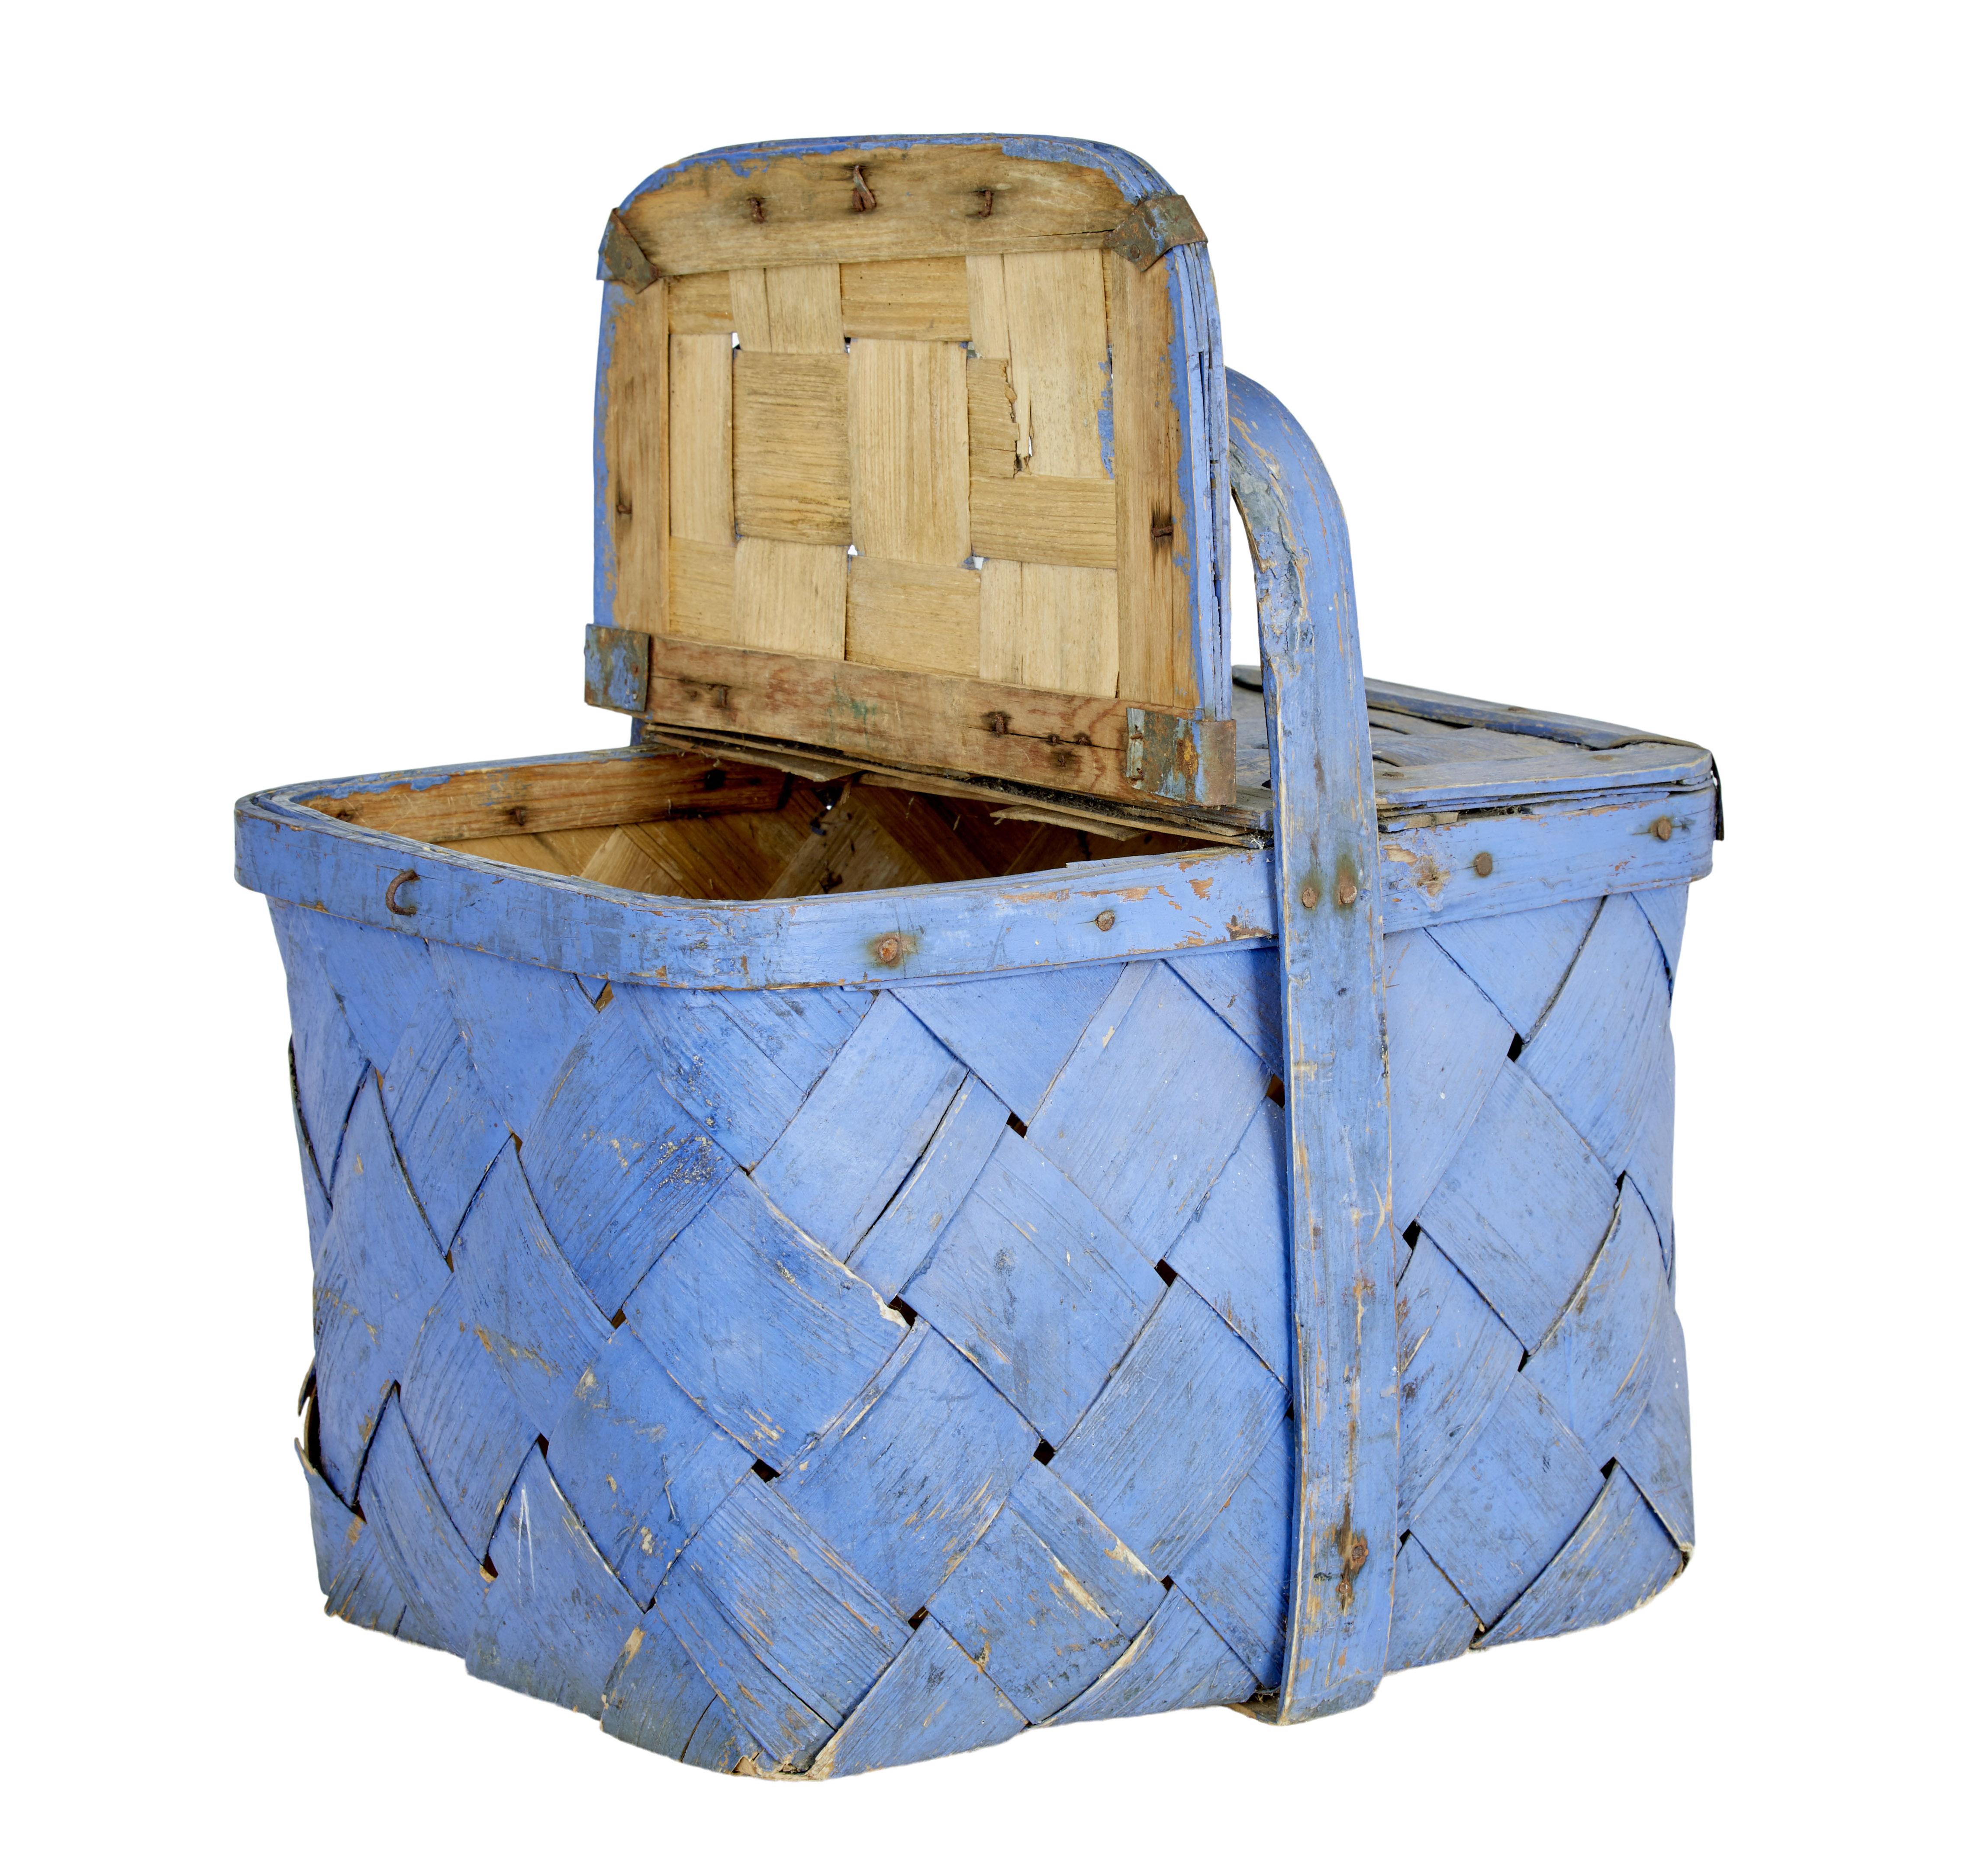 Late 19th century painted Swedish fruit basket circa 1890.

Woven using strips of pine, later painted. Double hinged lid allows access to inside.

Minor losses, good decorative piece.